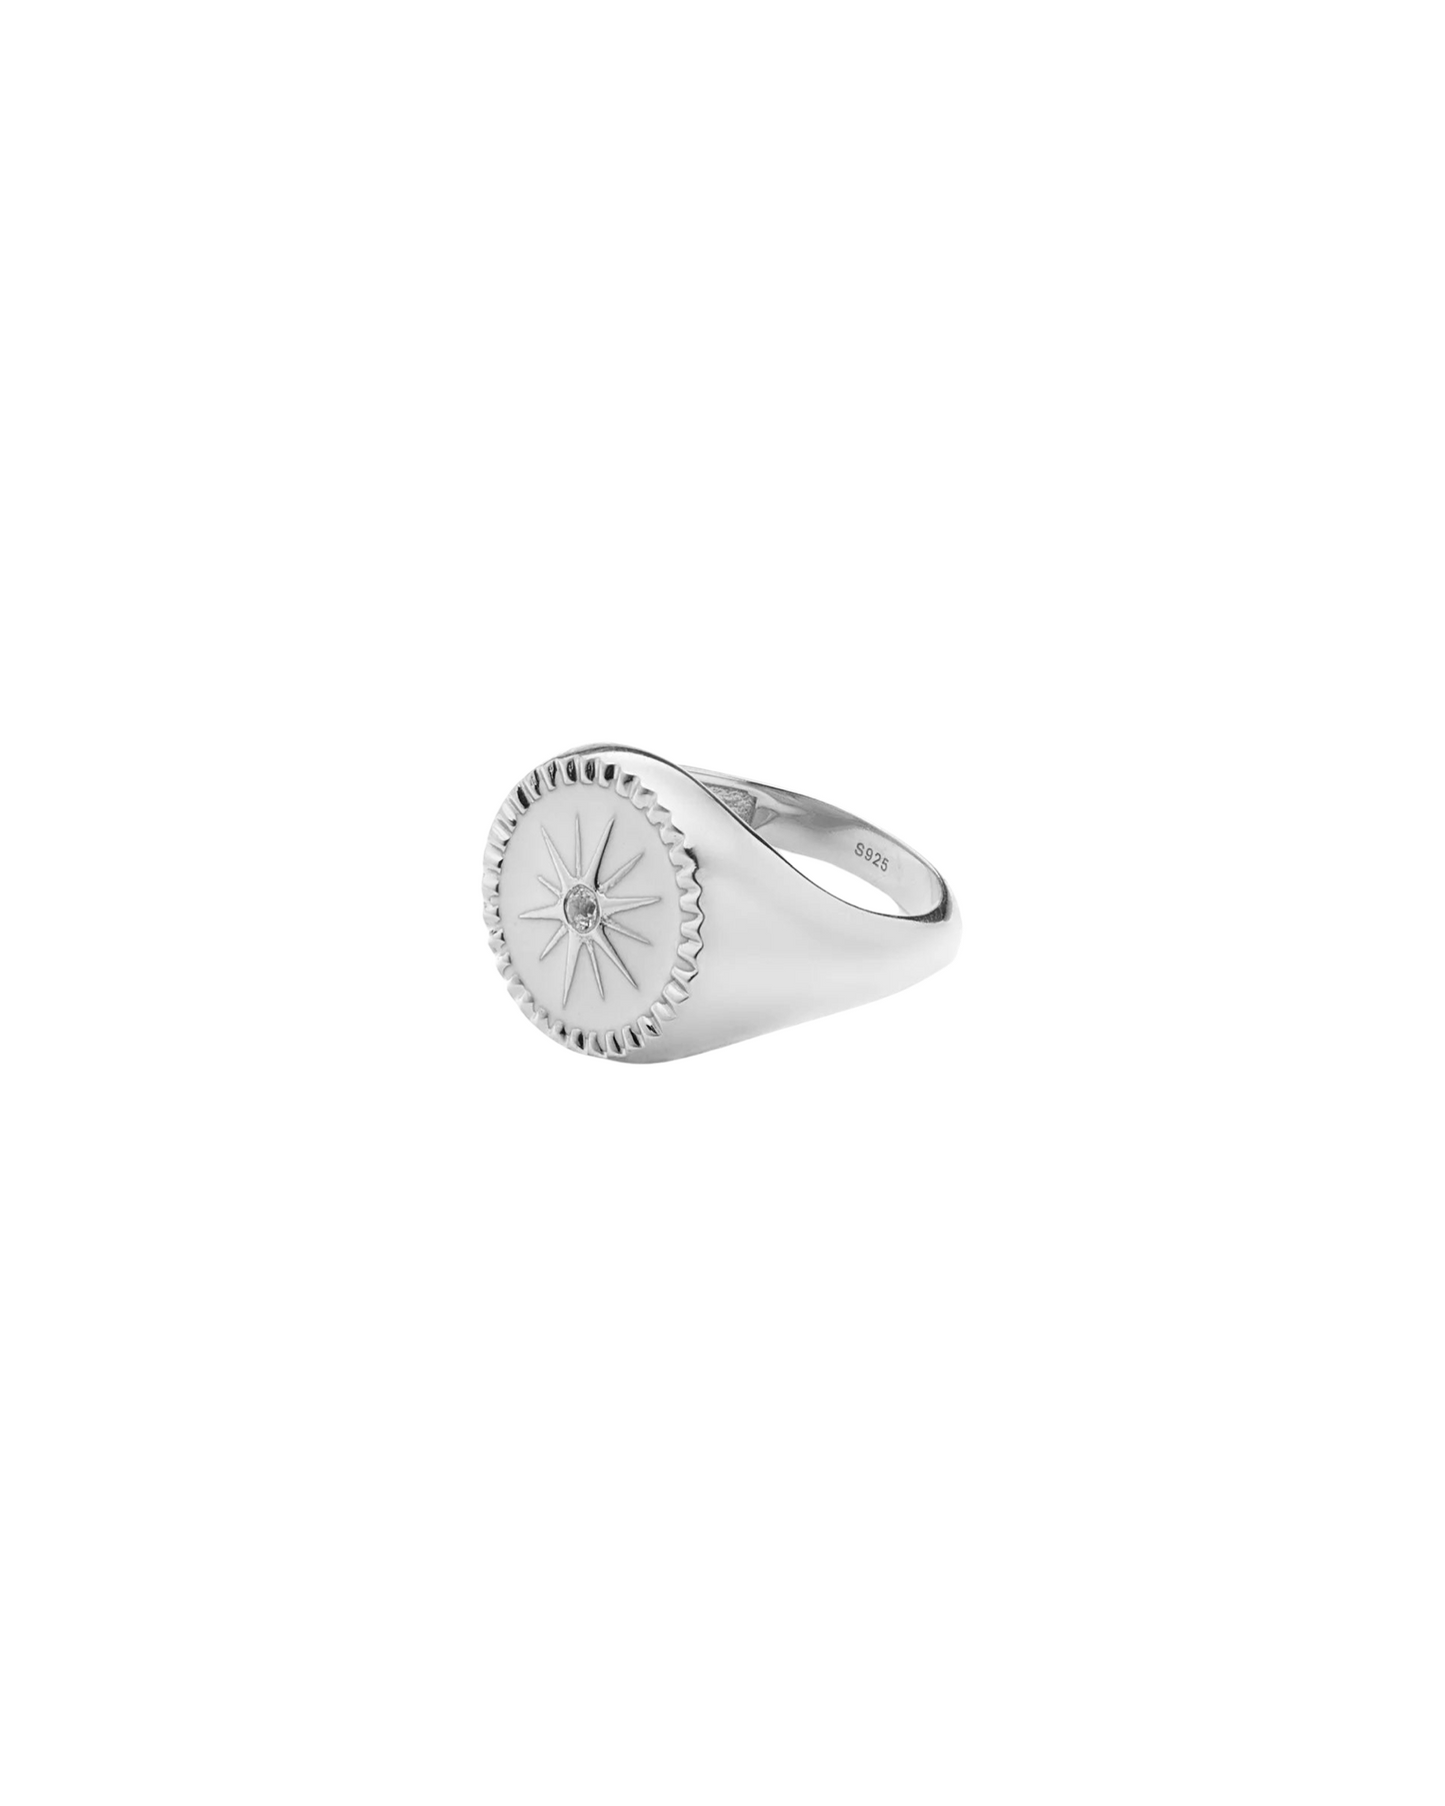 Guiding Star Signet Ring Silver By Silk and Steel